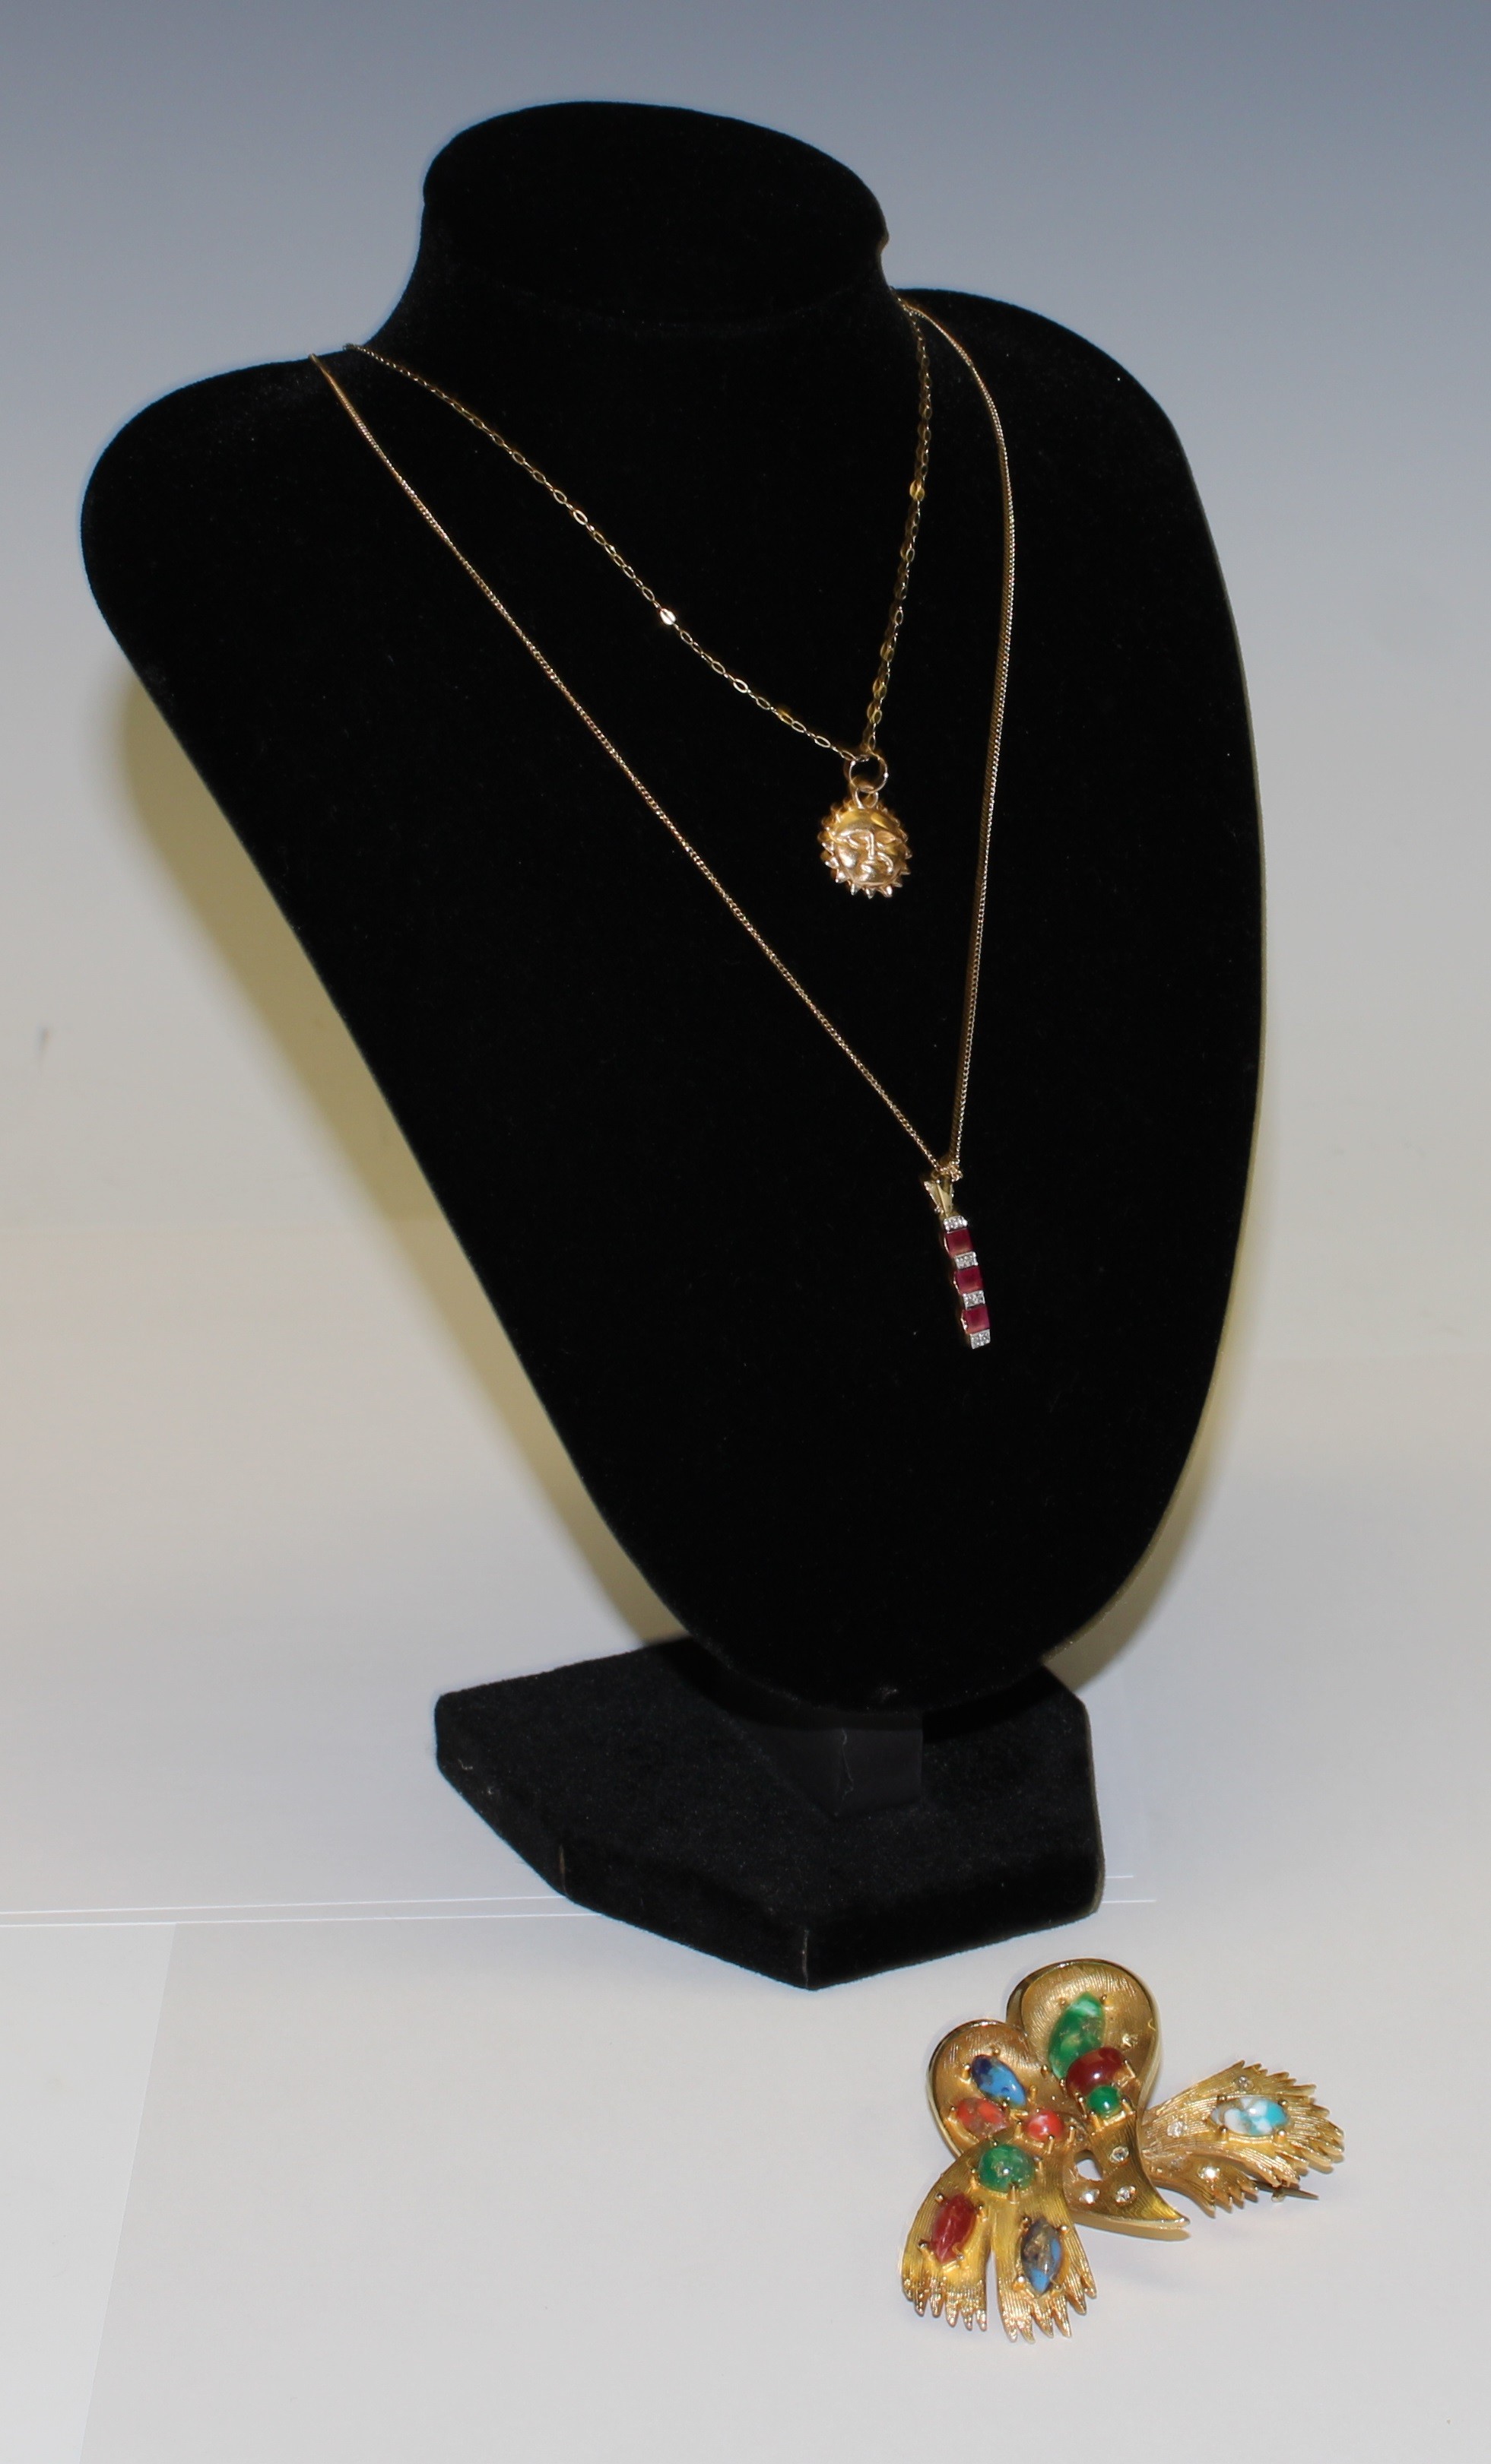 A 9ct gold diamond chip and ruby pendant on a 9ct gold necklace chain, marked 375, a 9ct gold